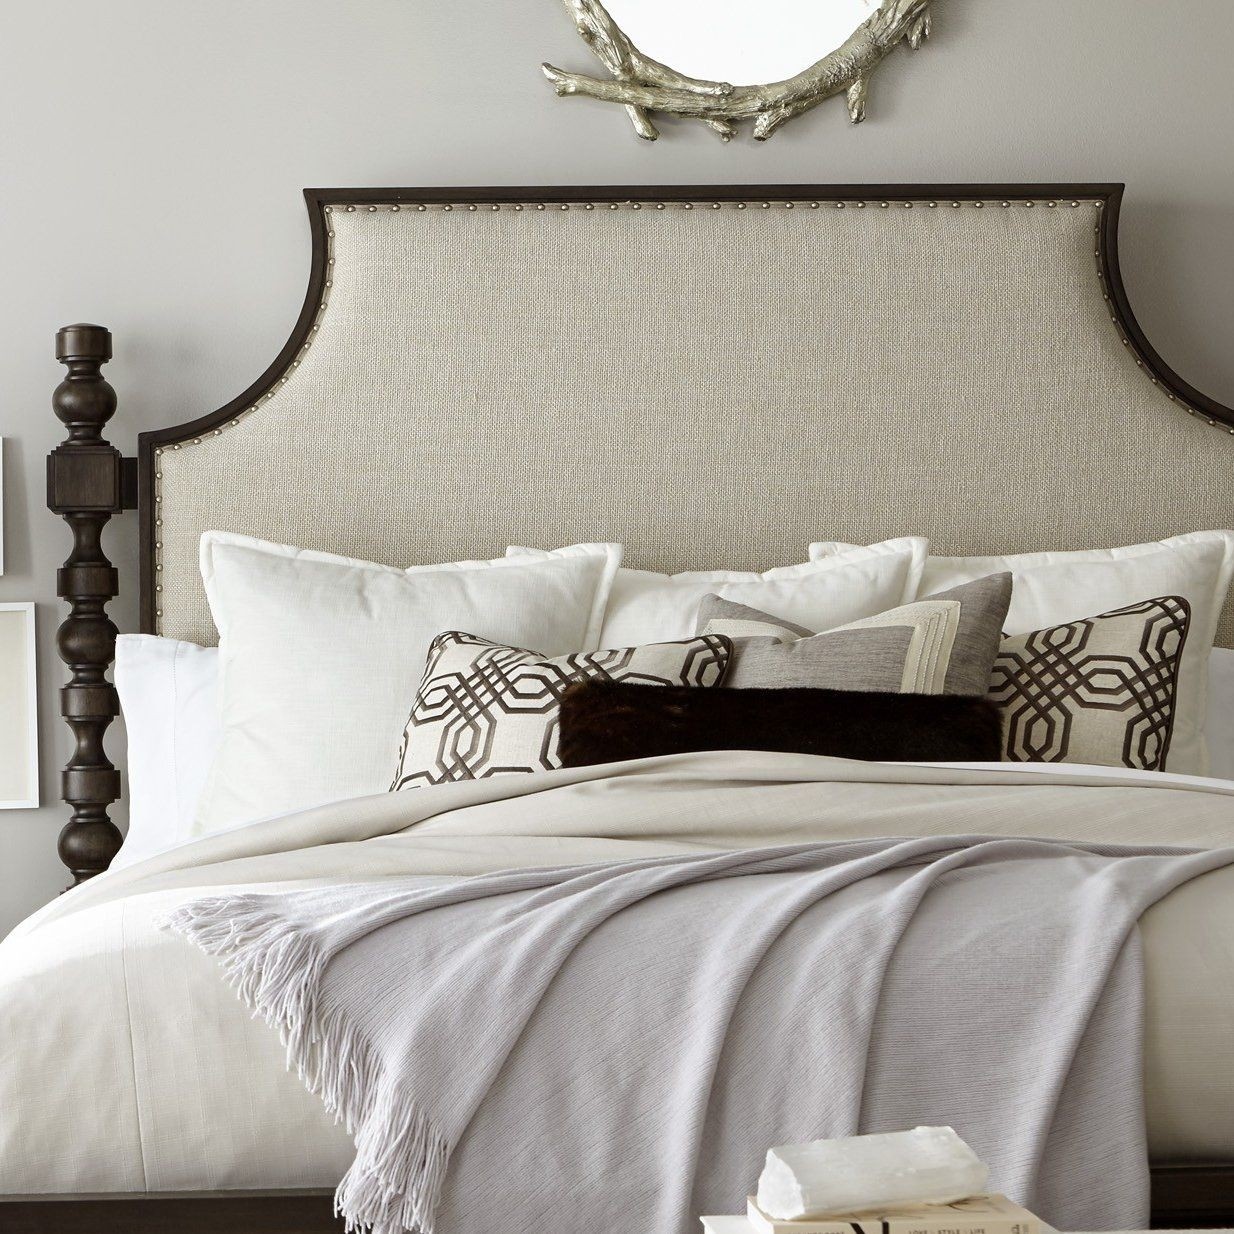 Get Creative with Fabric Headboards: Discover the Latest Designs from Leading Manufacturers